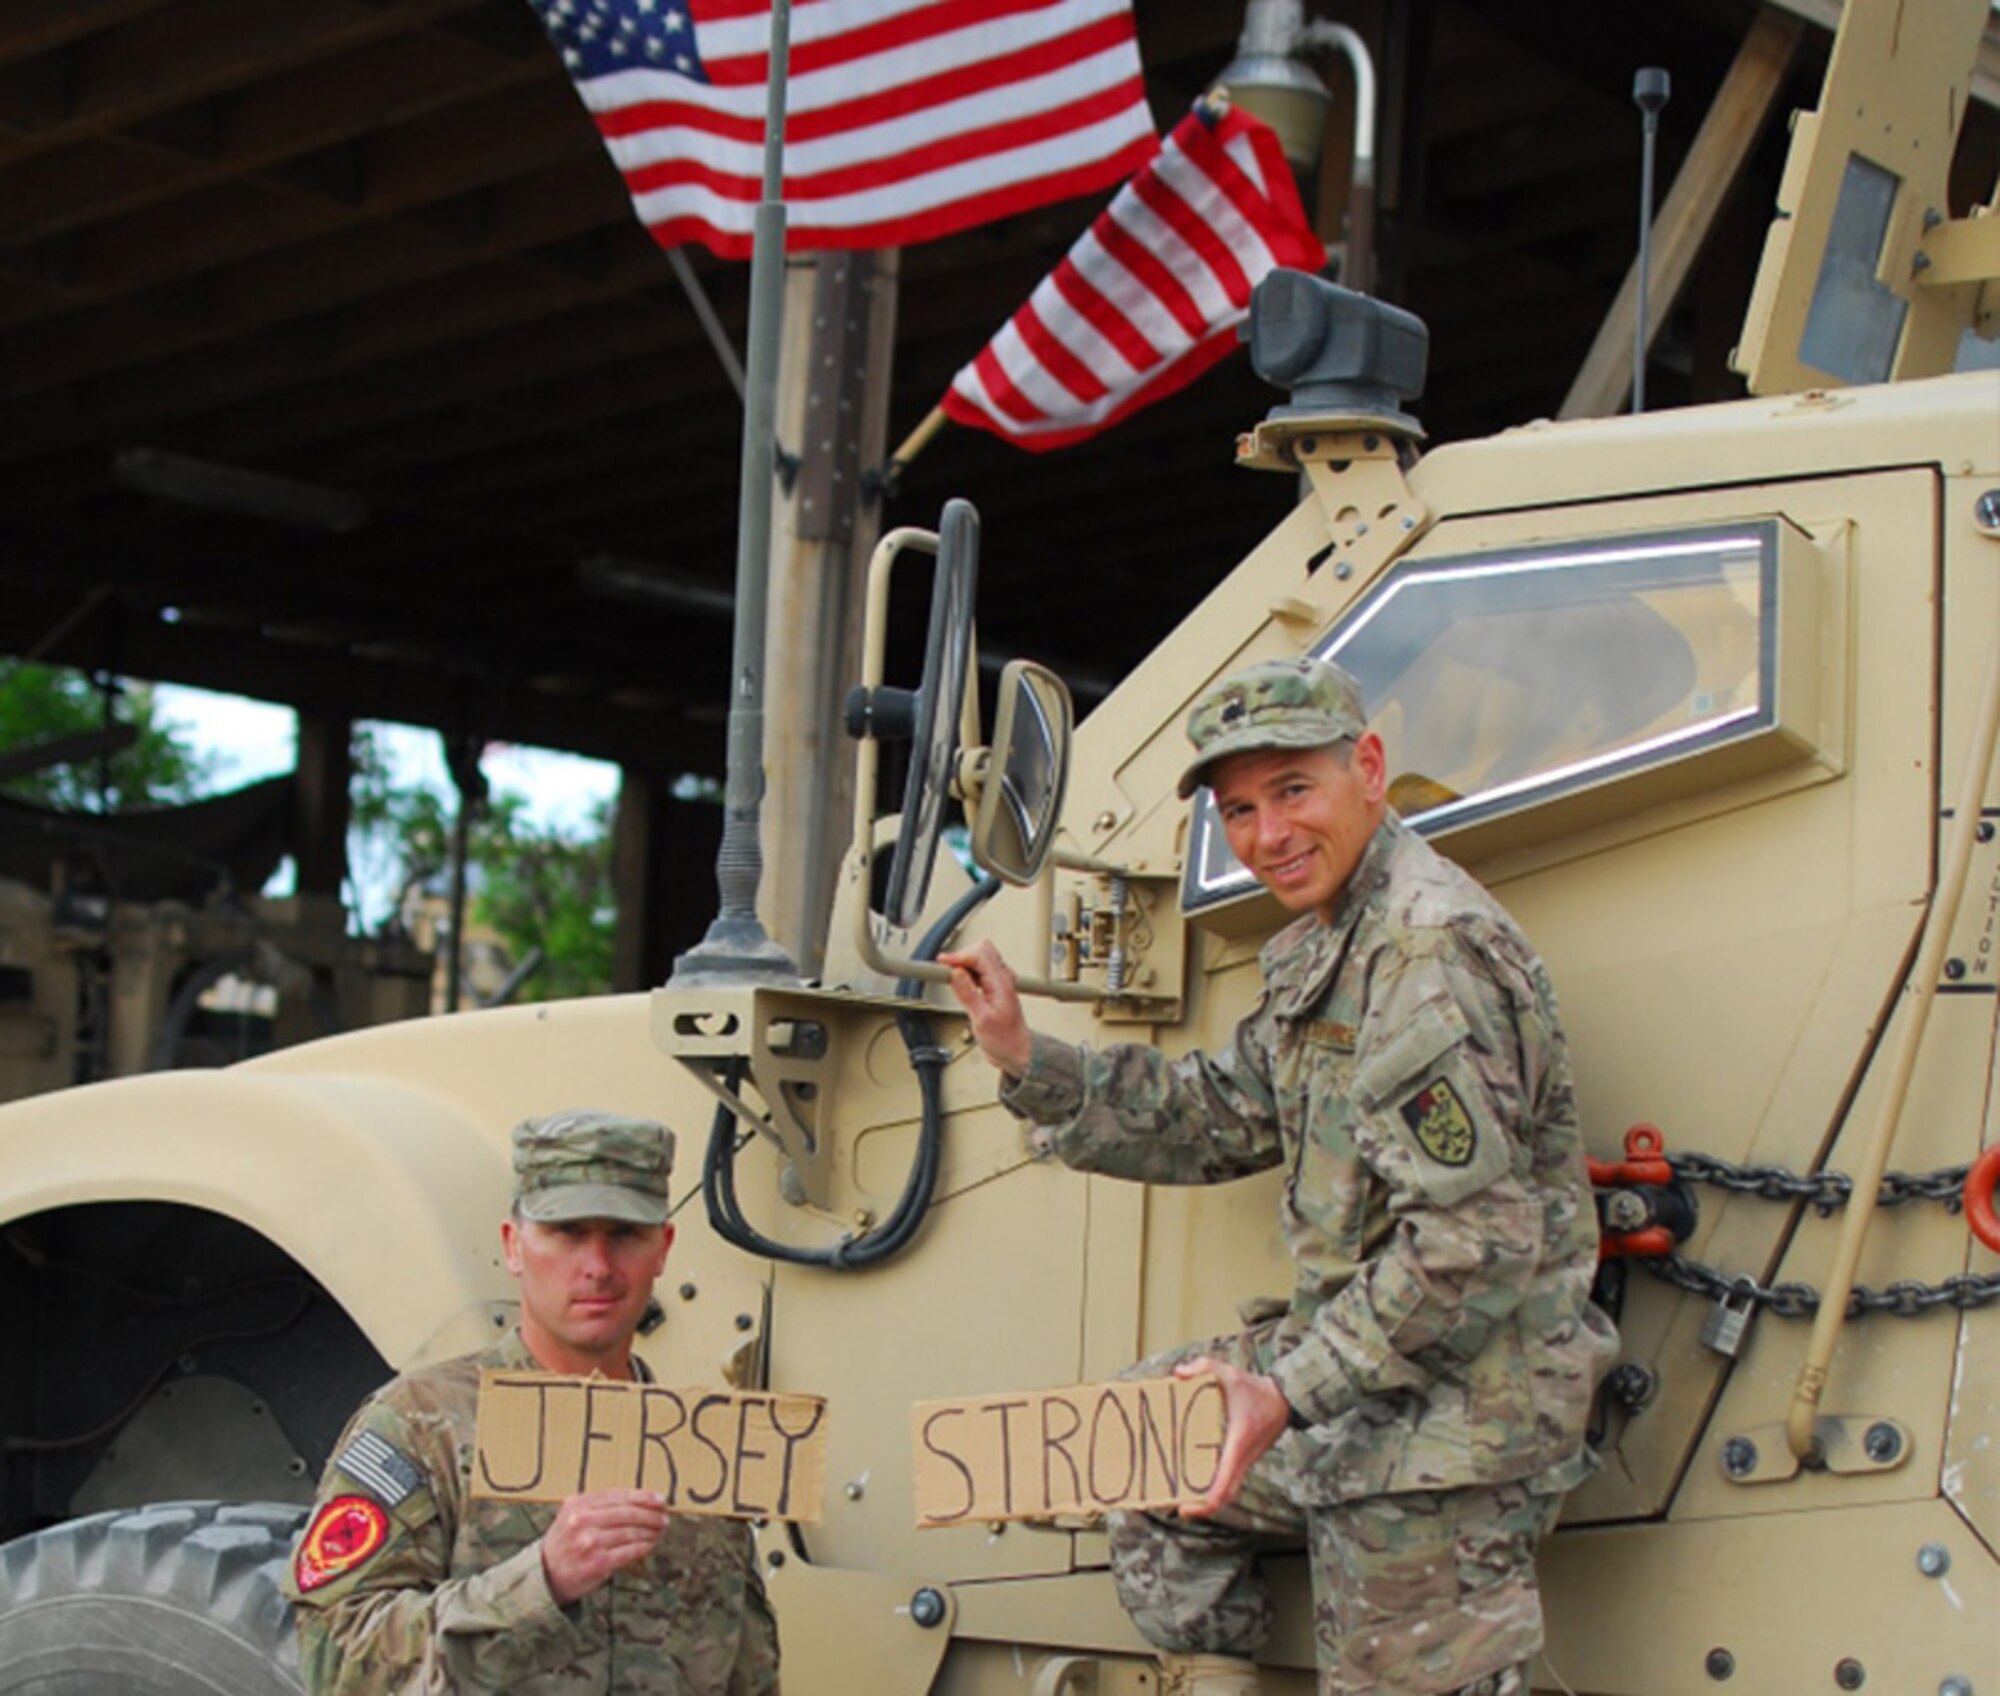 A picture of Lt. Col. Jesse Arnstein and Tech. Sgt. Chris Donohue posing for a photo in front of a military vehicle, holding a sign that says, "Jersey Strong".